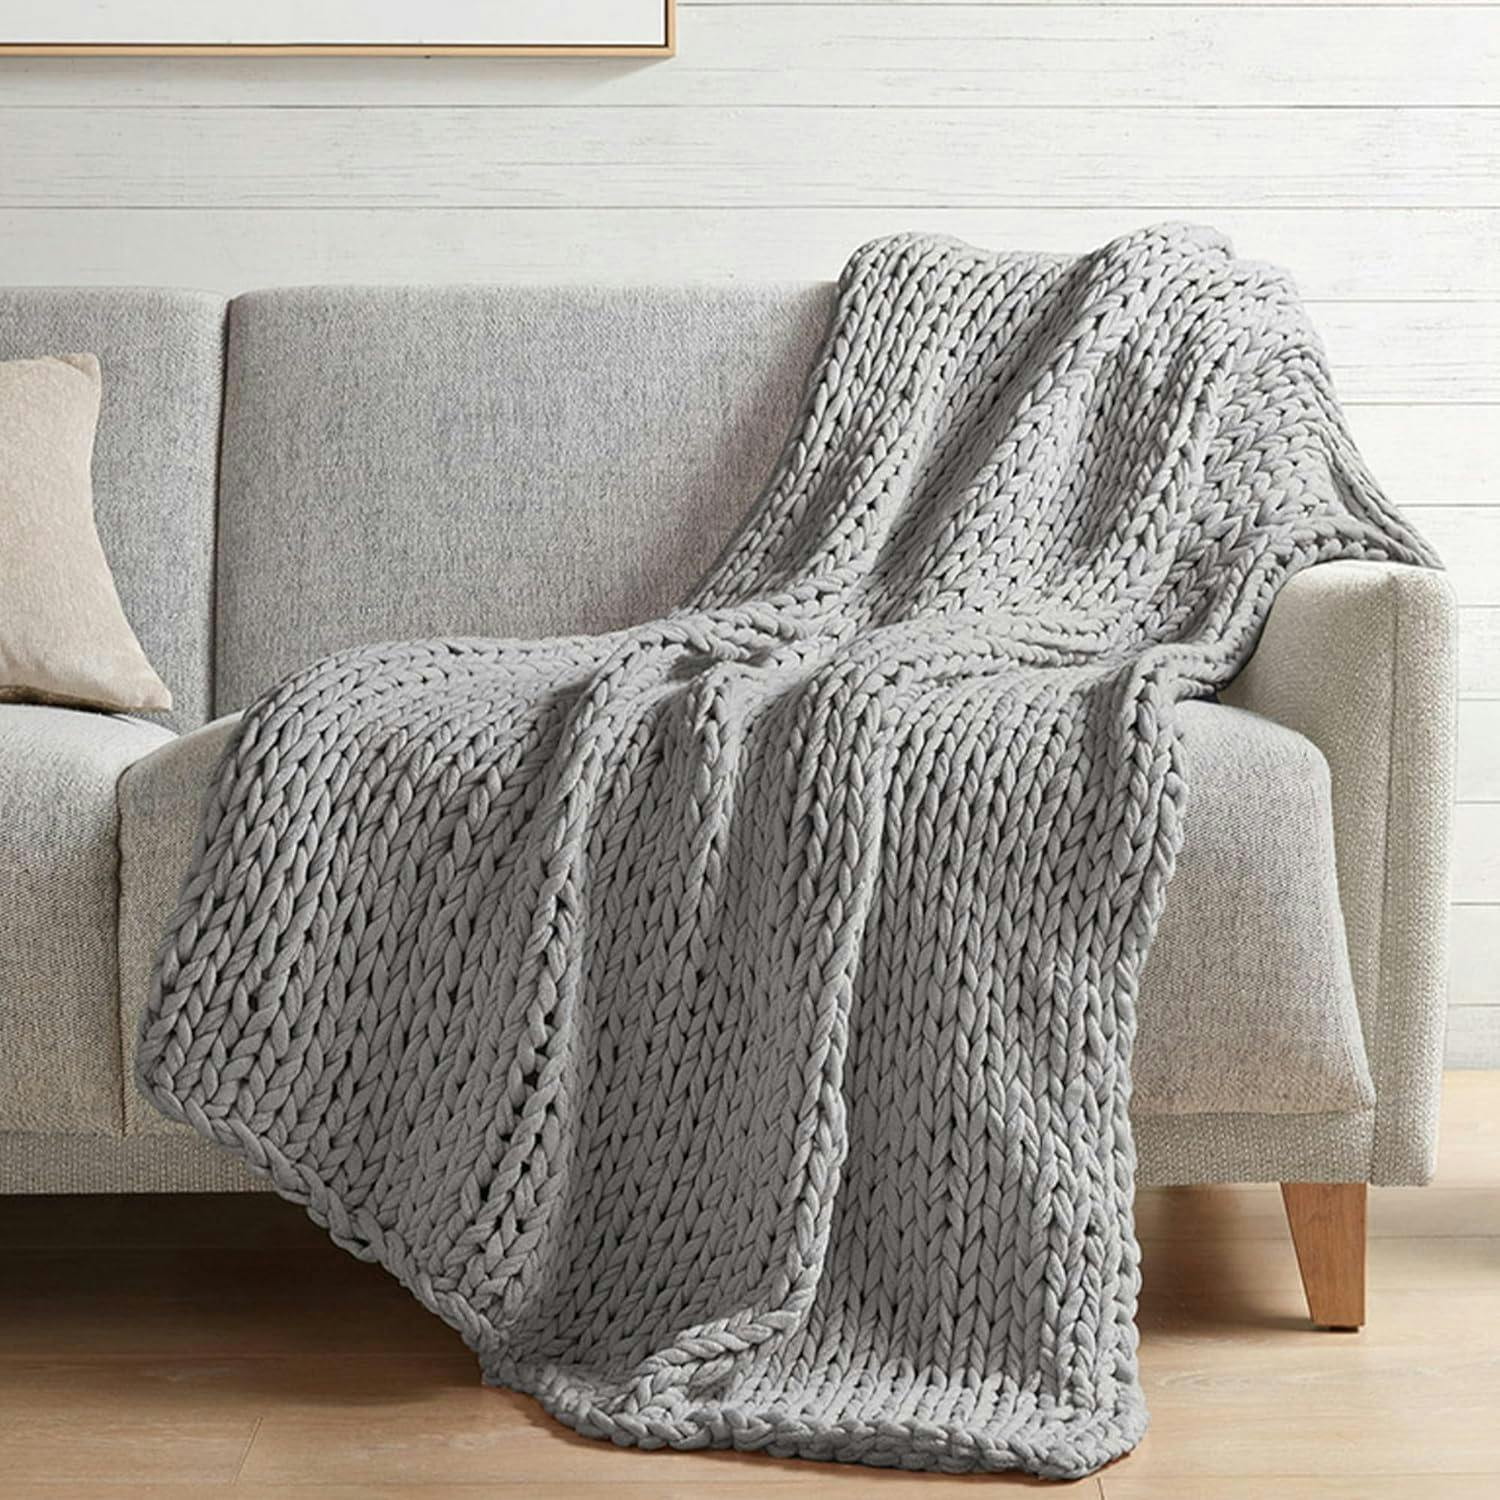 Blush Chunky Cable Hand-Knit 50"x60" Throw Blanket